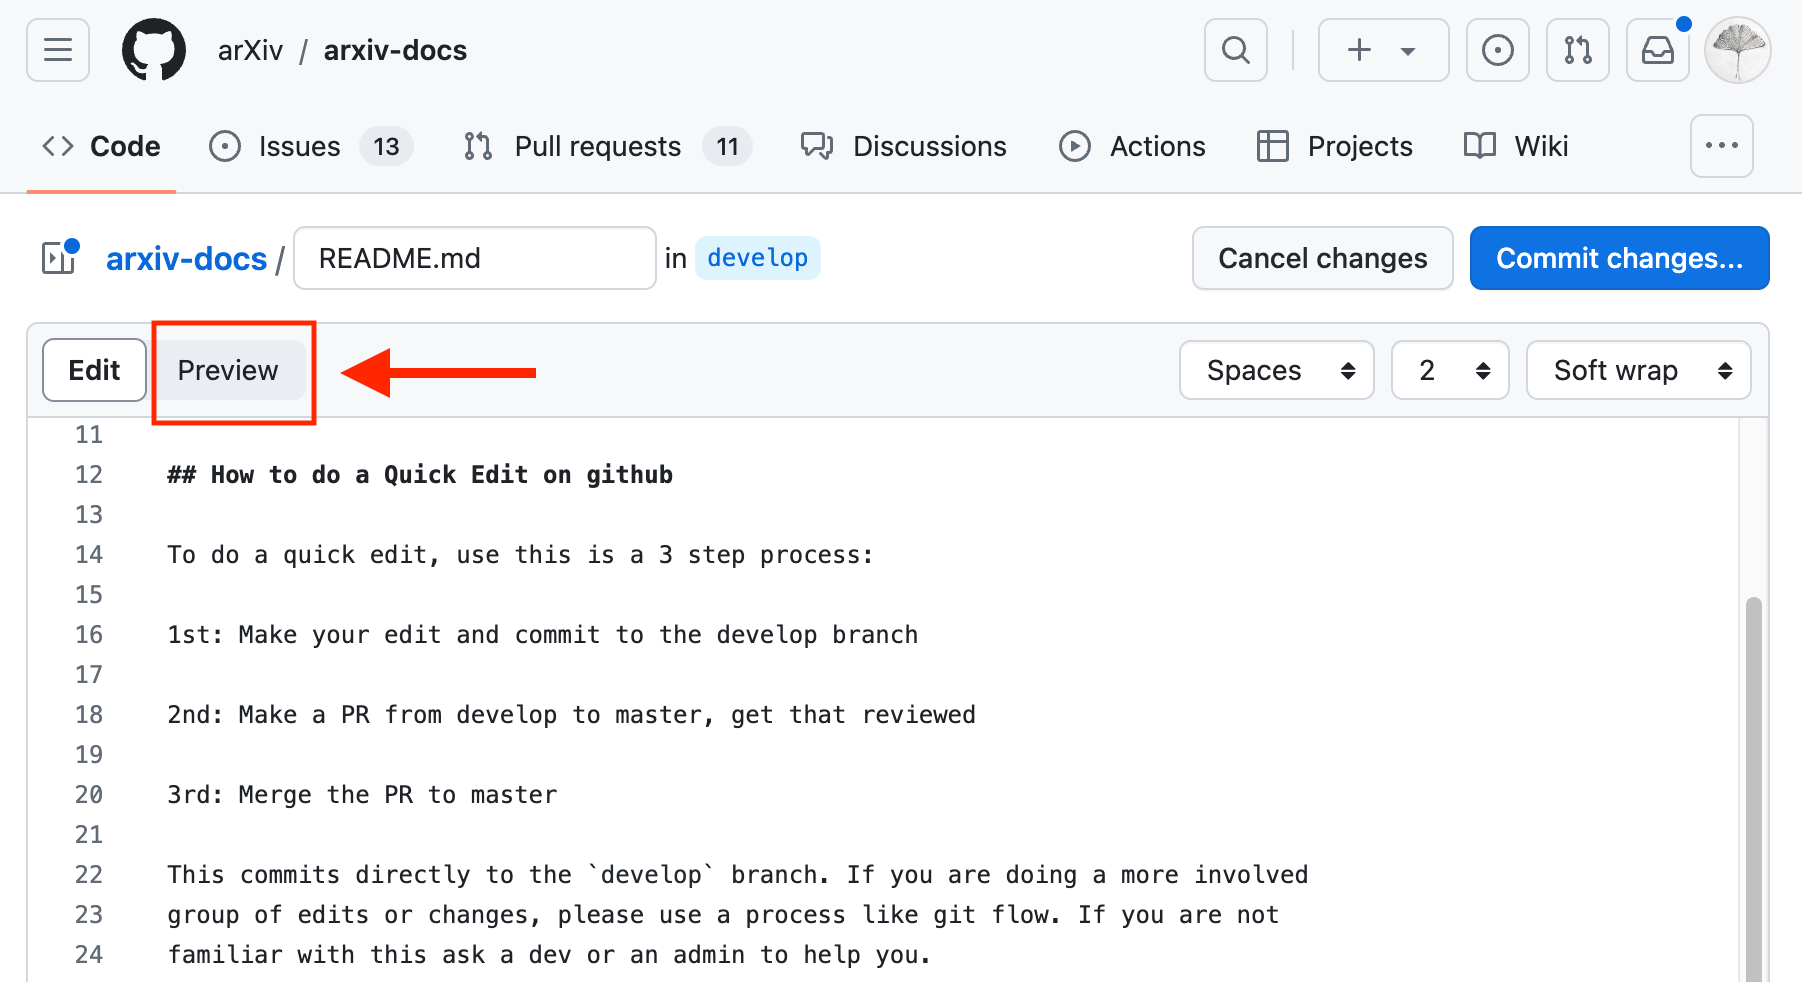 Screenshot of the location of the preview button on the edited page in Github